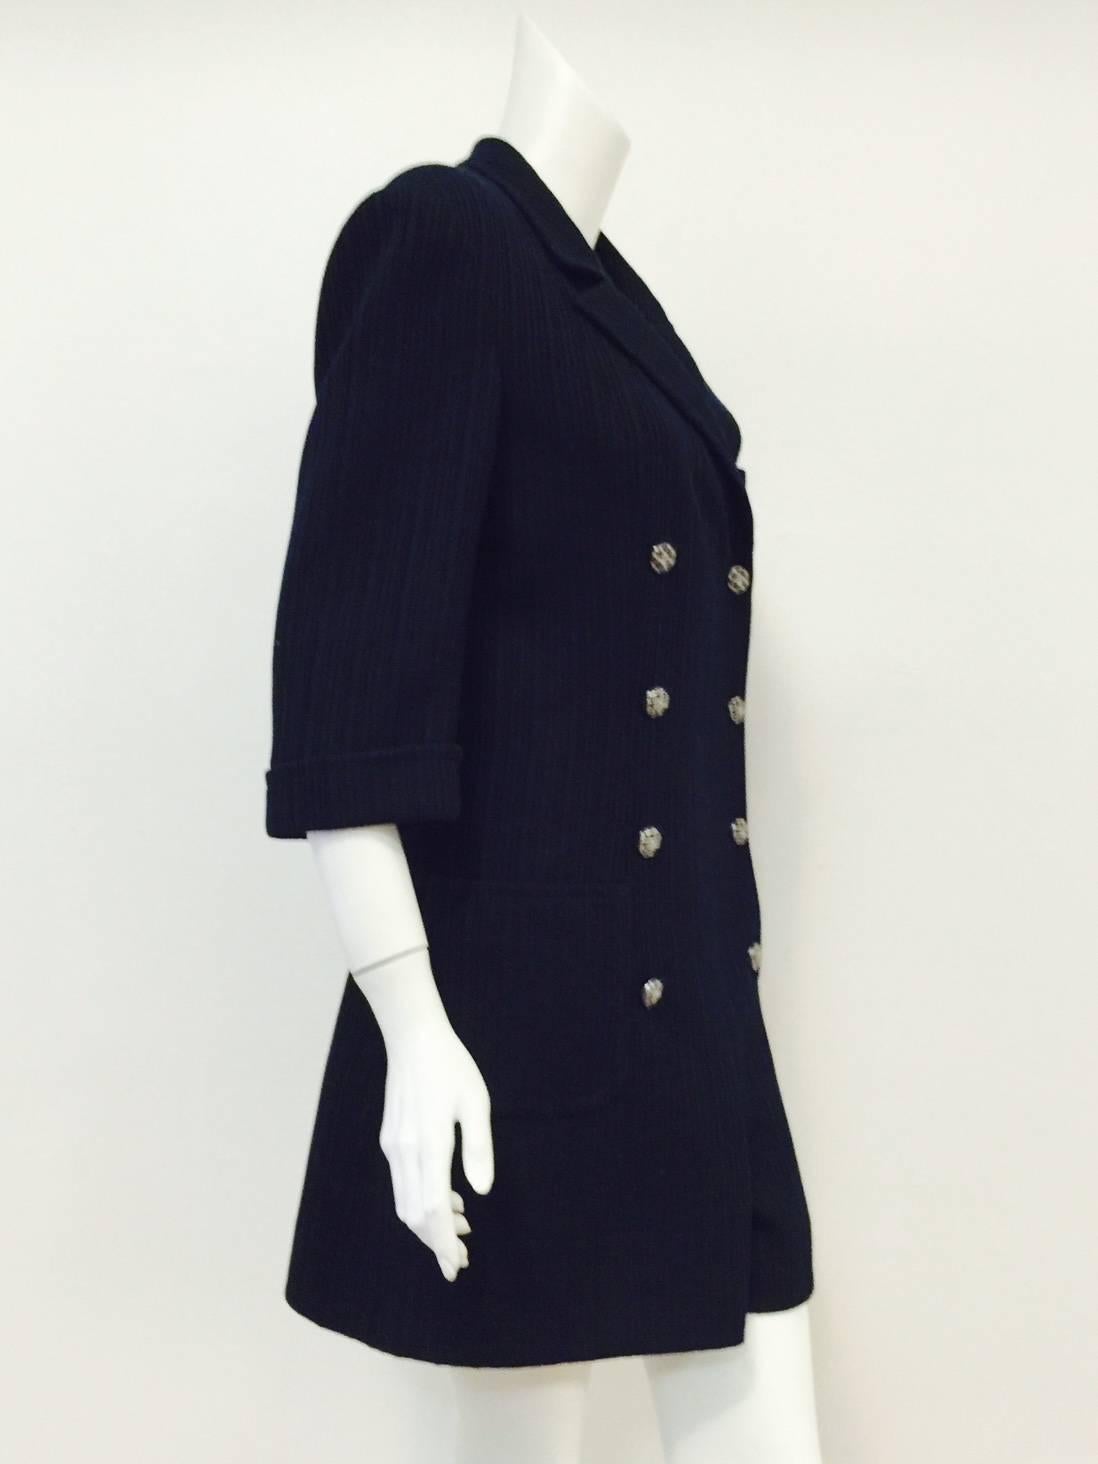 Chanel Navy Cotton Spring Romper With Elbow Length Sleeves was made for 